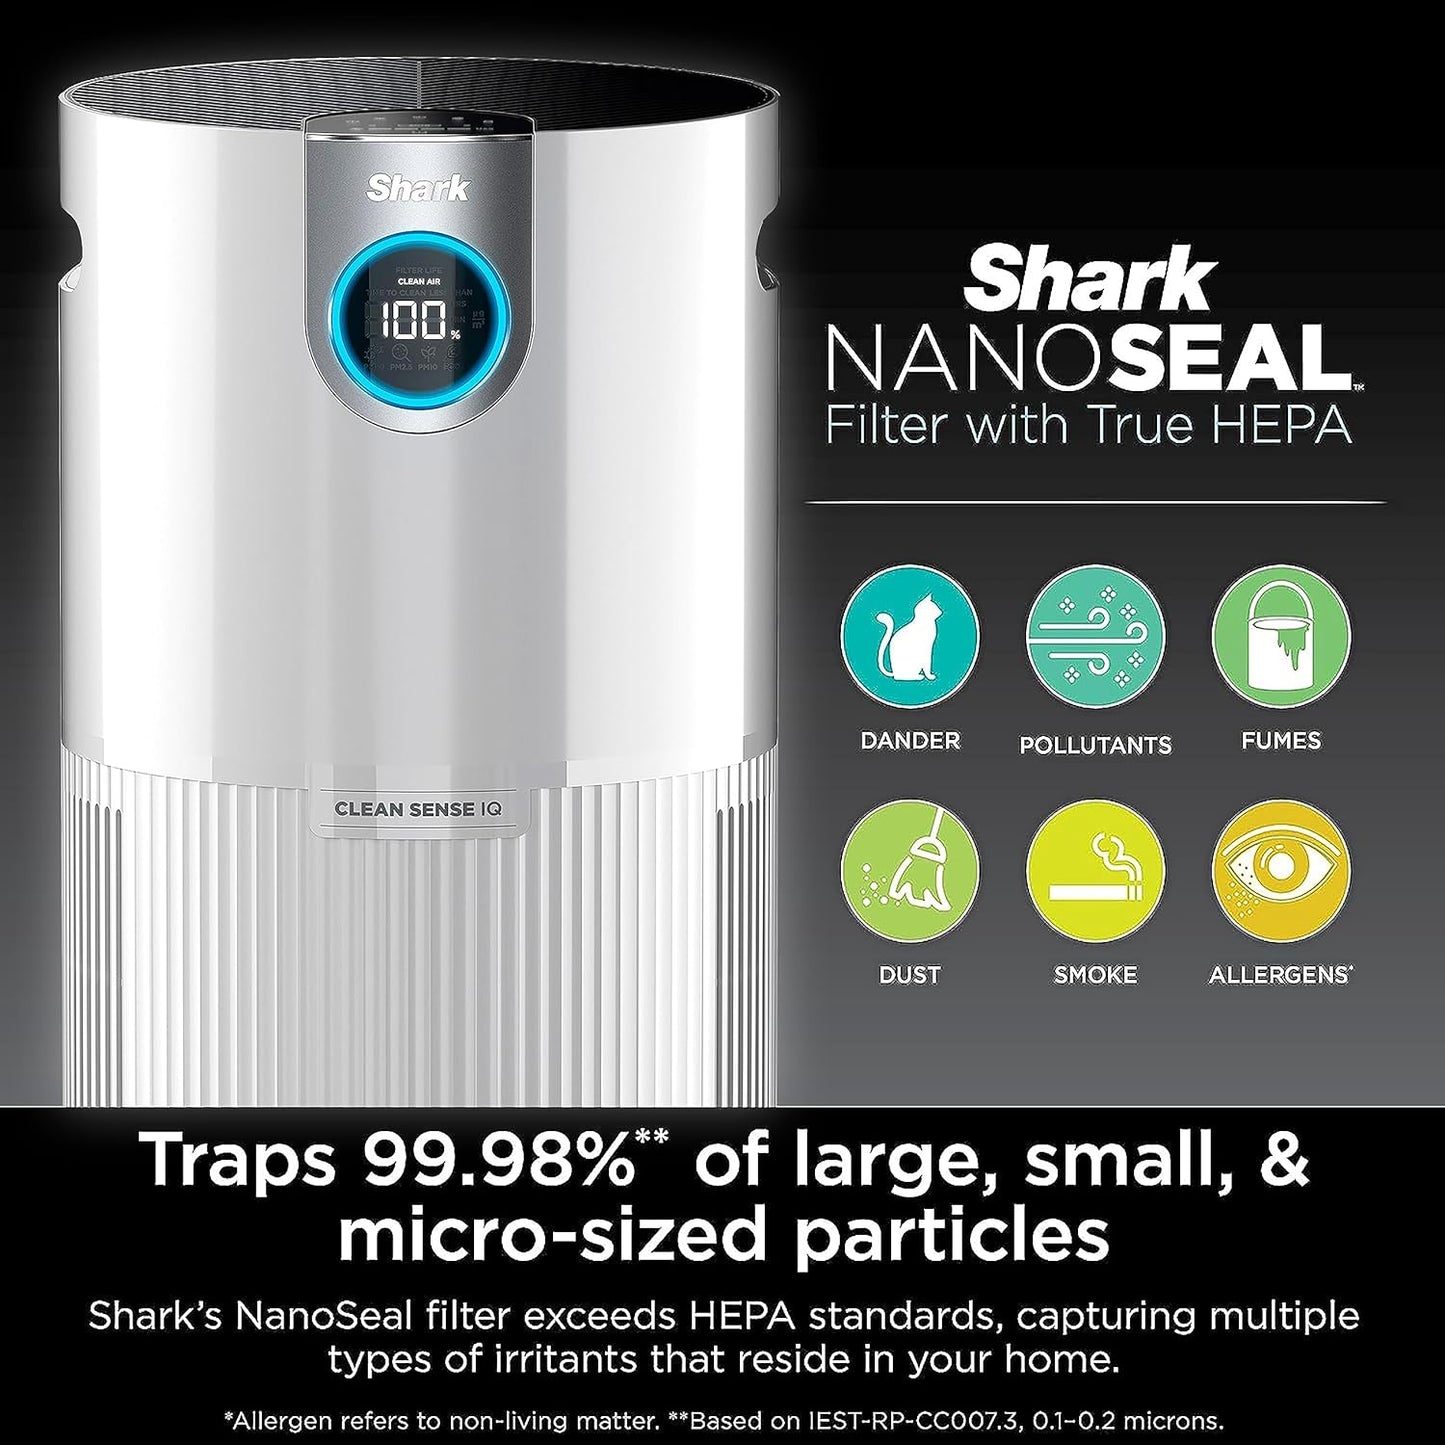 SHARK UA205 Nanoseal HEPA Air Purifier MAX with Clean Sense for Home, Allergies, 1350 Sq Ft, XL Room, Captures 99.98% of Particles, Pollutants, Dust, Smoke, Allergens & Smells, White (Renewed)